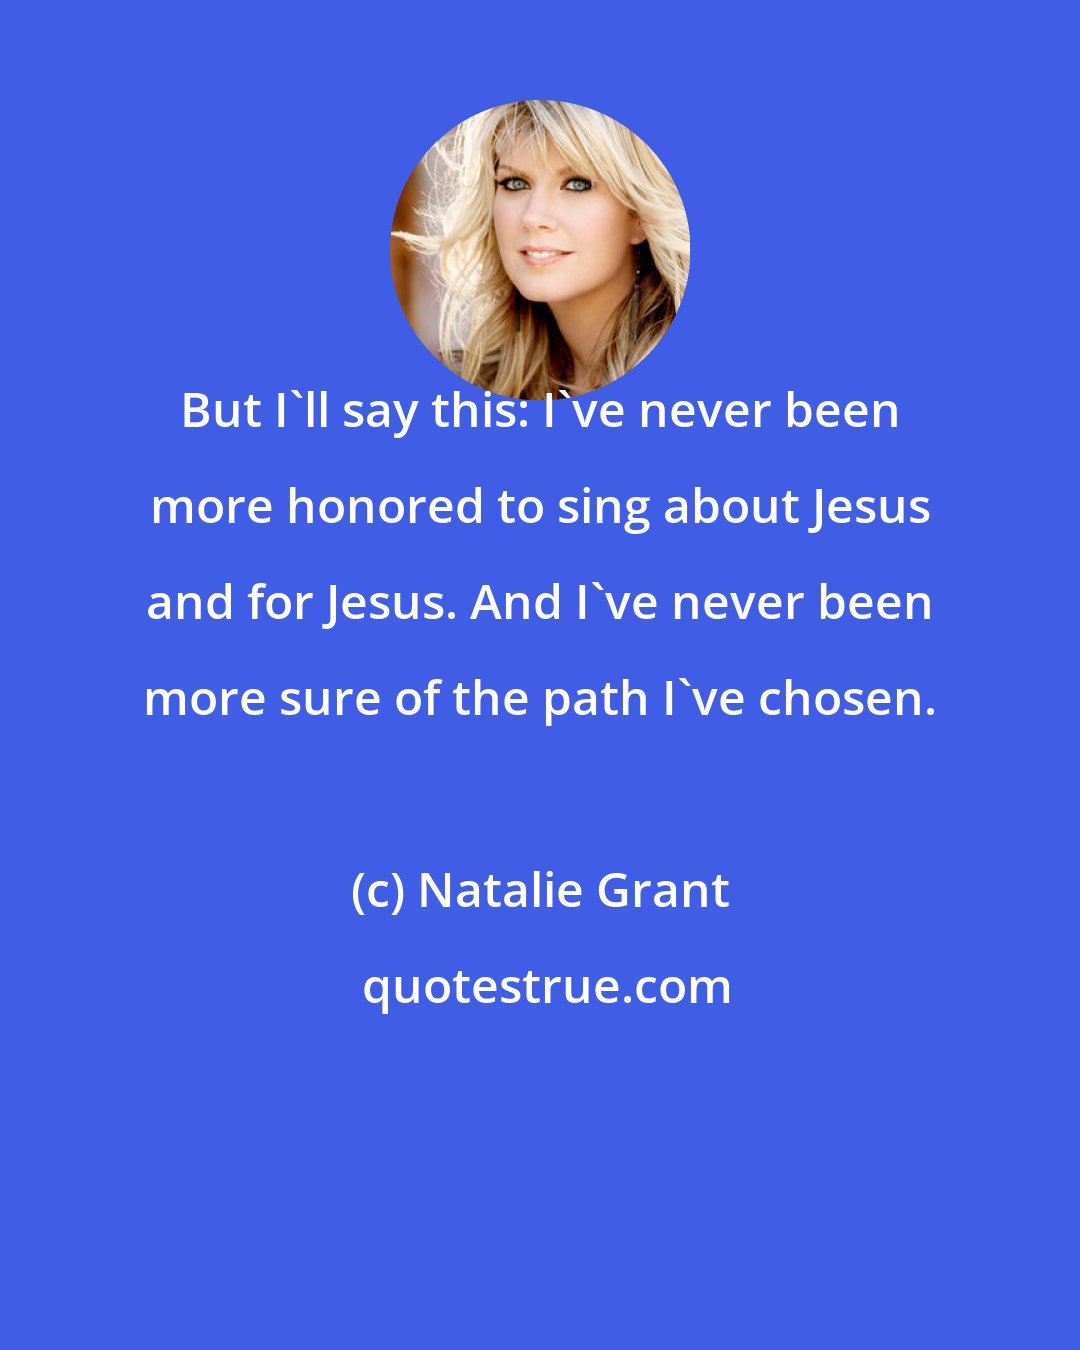 Natalie Grant: But I'll say this: I've never been more honored to sing about Jesus and for Jesus. And I've never been more sure of the path I've chosen.